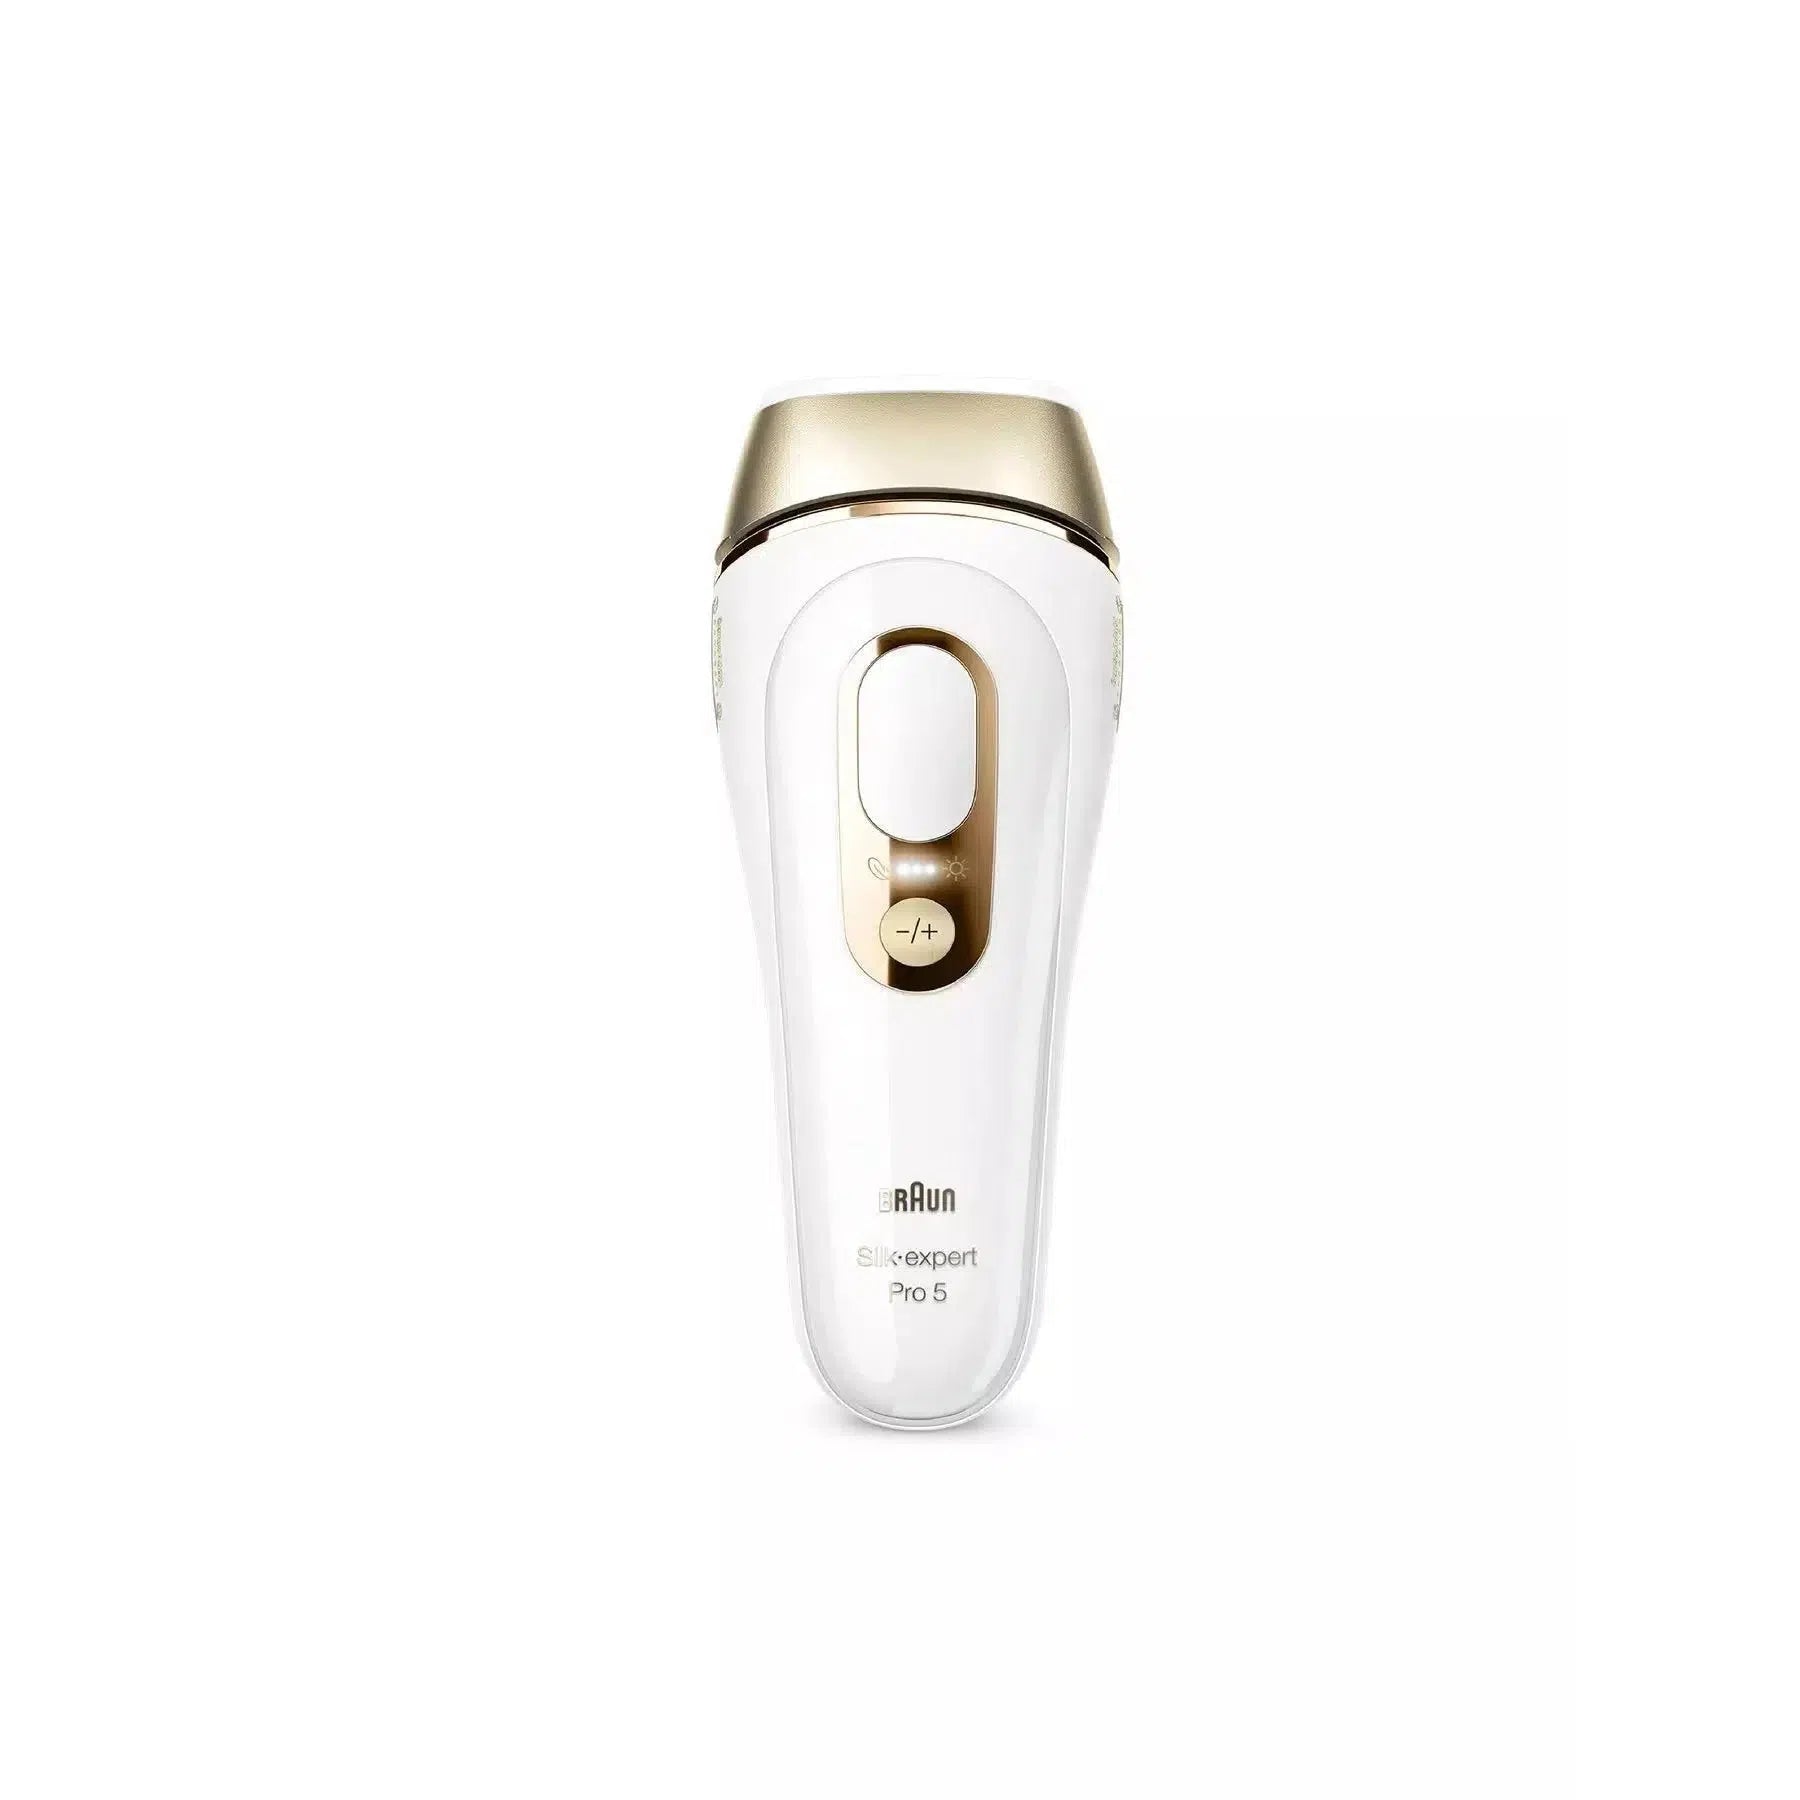 Braun Silk-expert Pro 5 PL5257 IPL Hair Removal System White & Gold with  Pouch